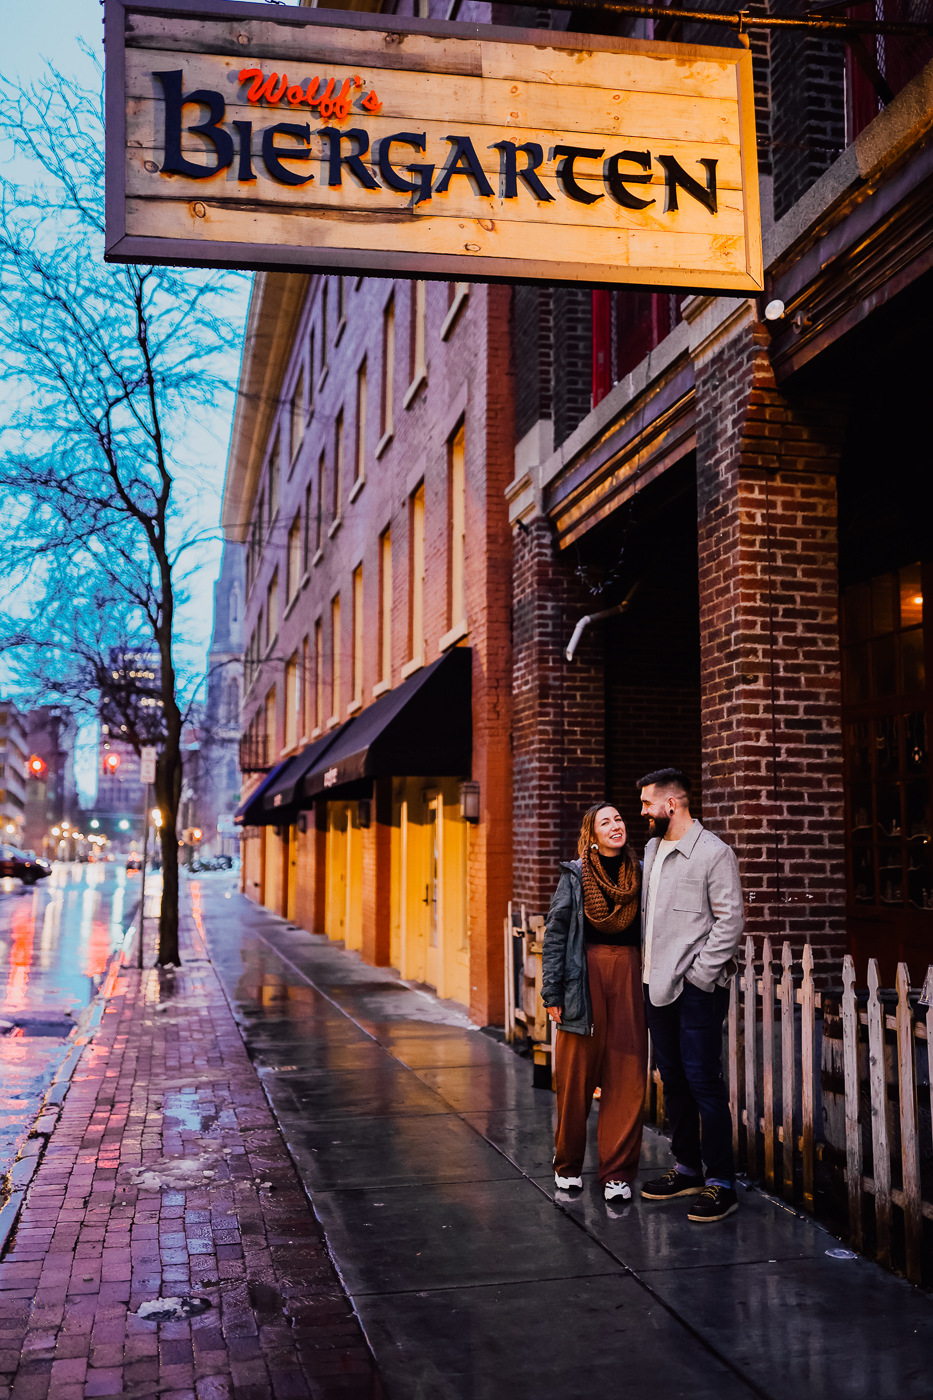  Engaged couple stands in front of Wolff’s Biergarten in downtown Syracuse  